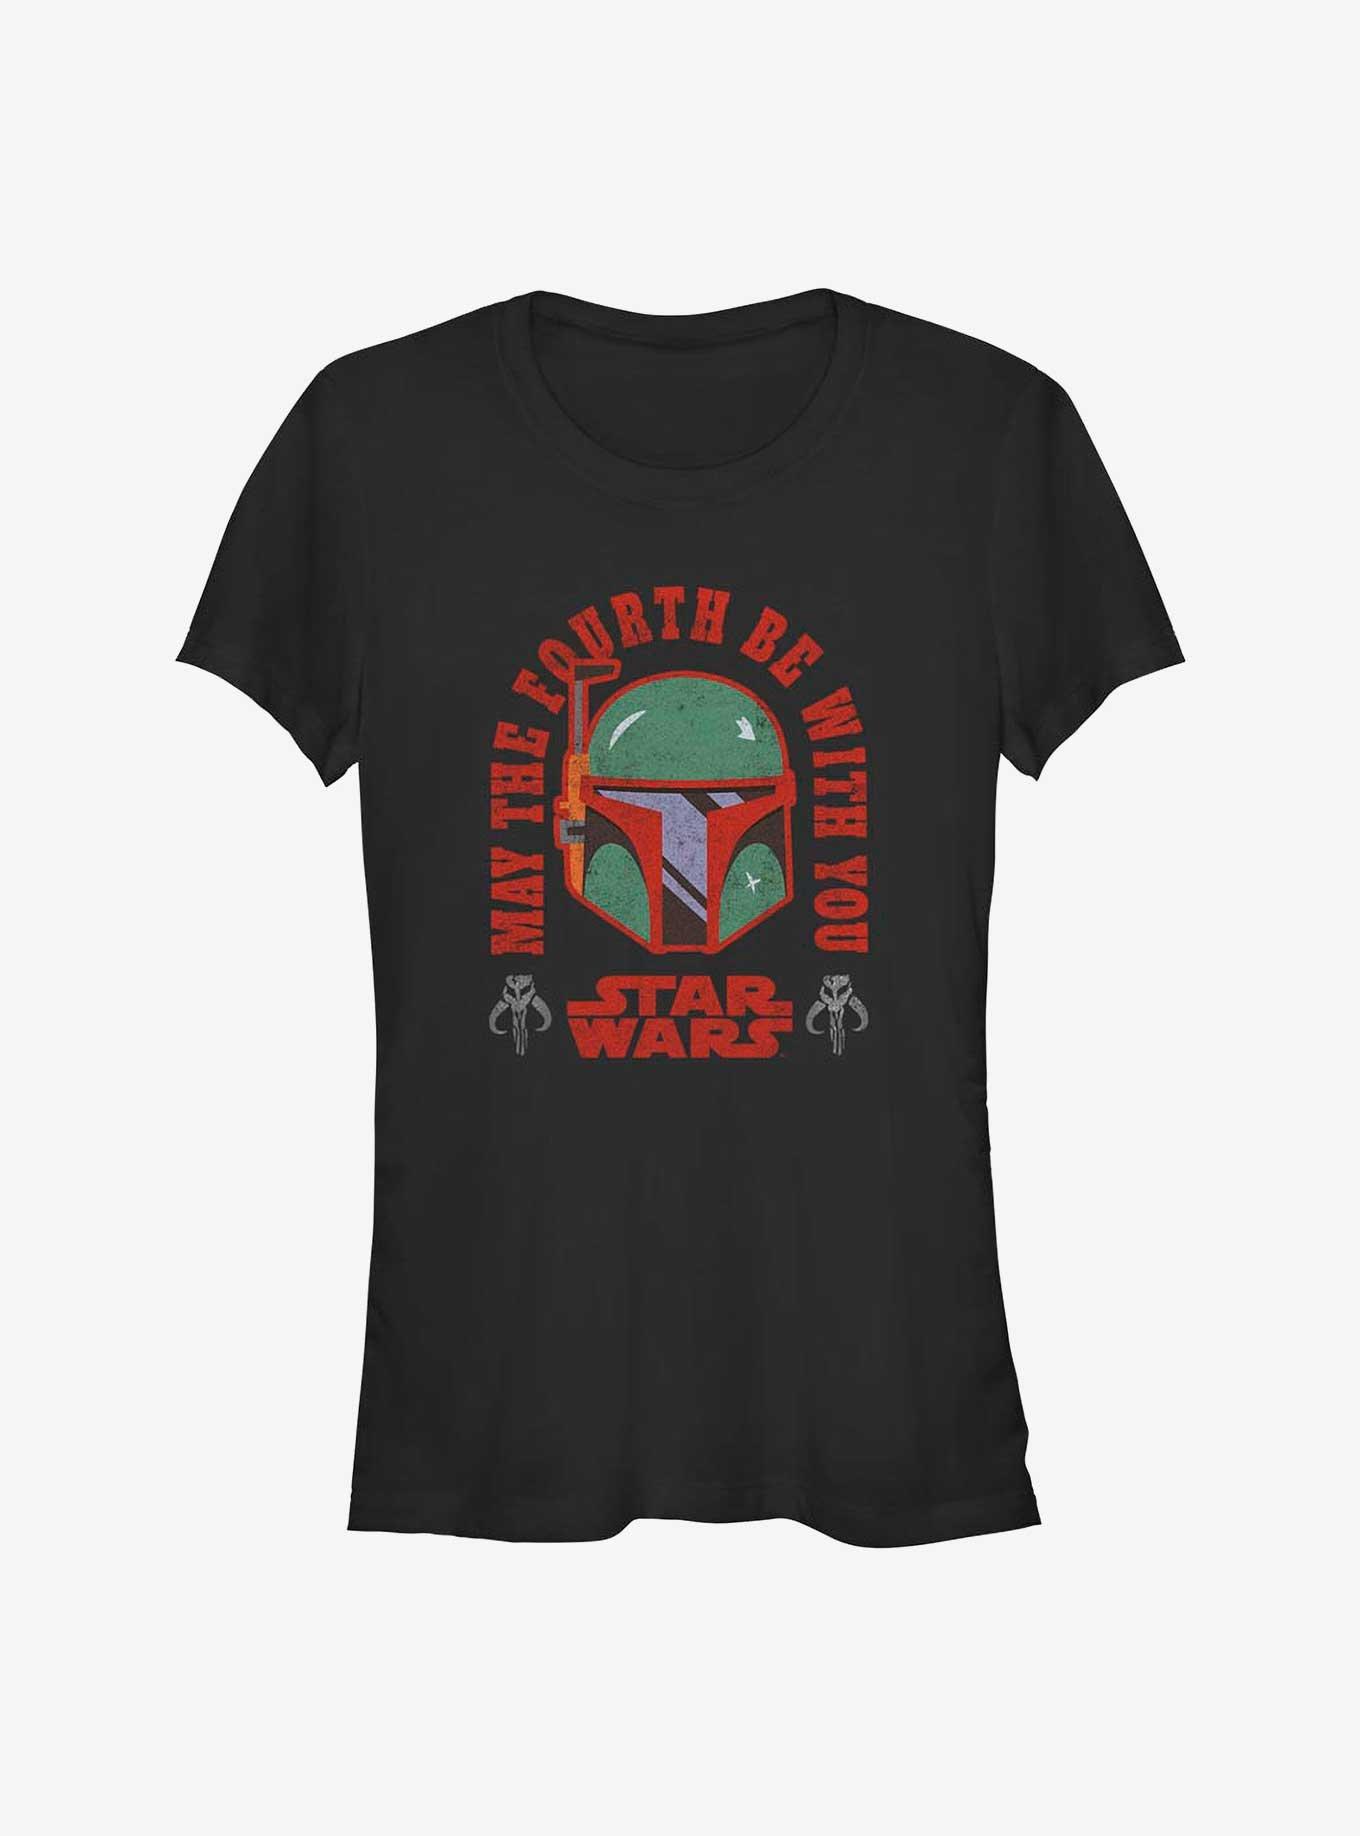 Star Wars May The Fourth Be With You Girls T-Shirt, BLACK, hi-res